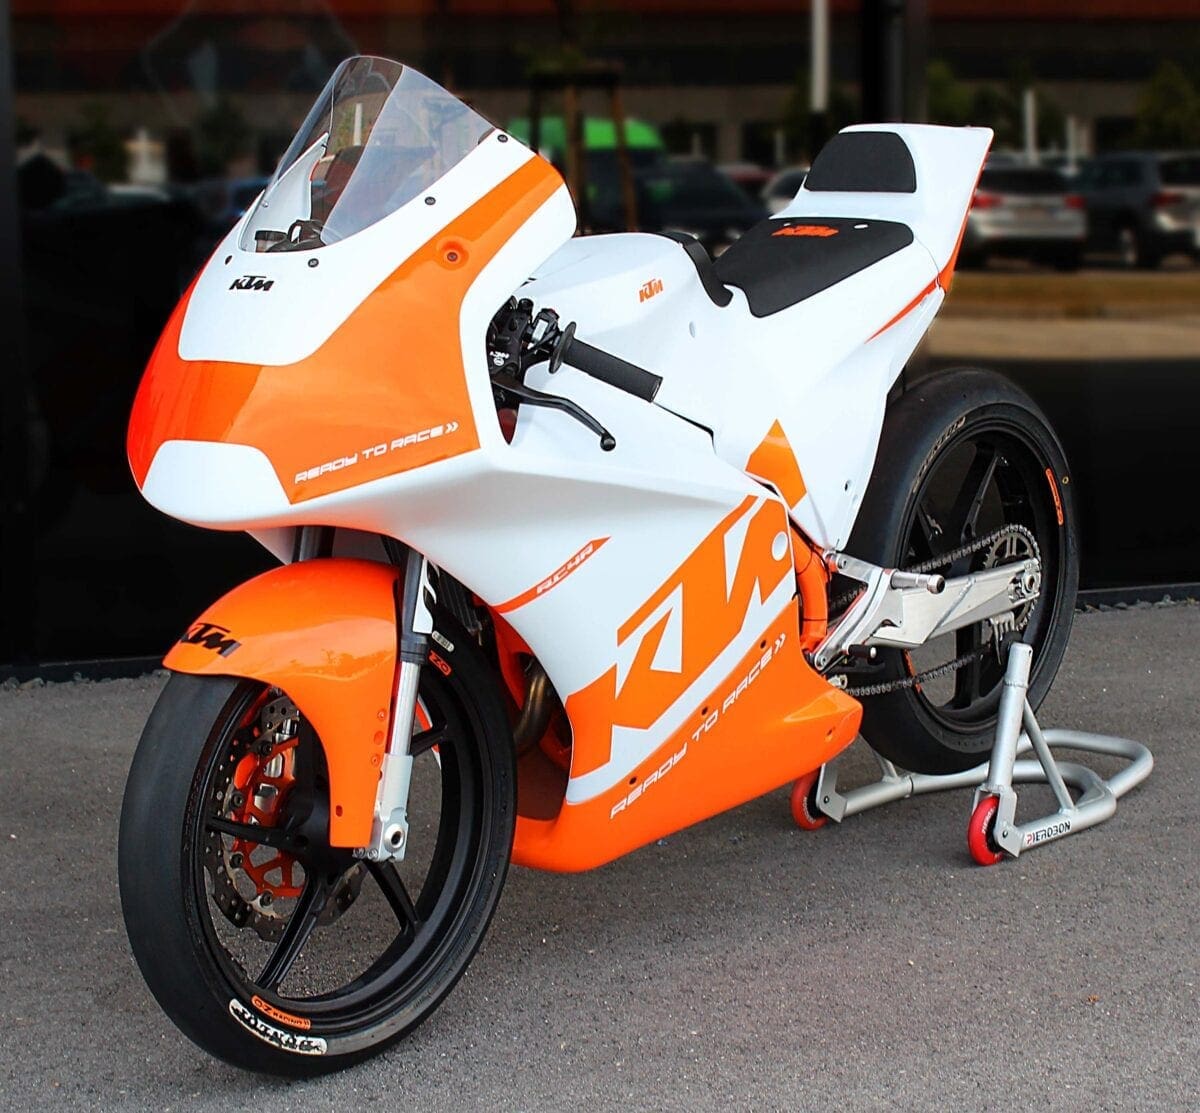 KTM’s RC4R helps the NEXT GENERATION of racers. CLICK for TECHNICAL details.